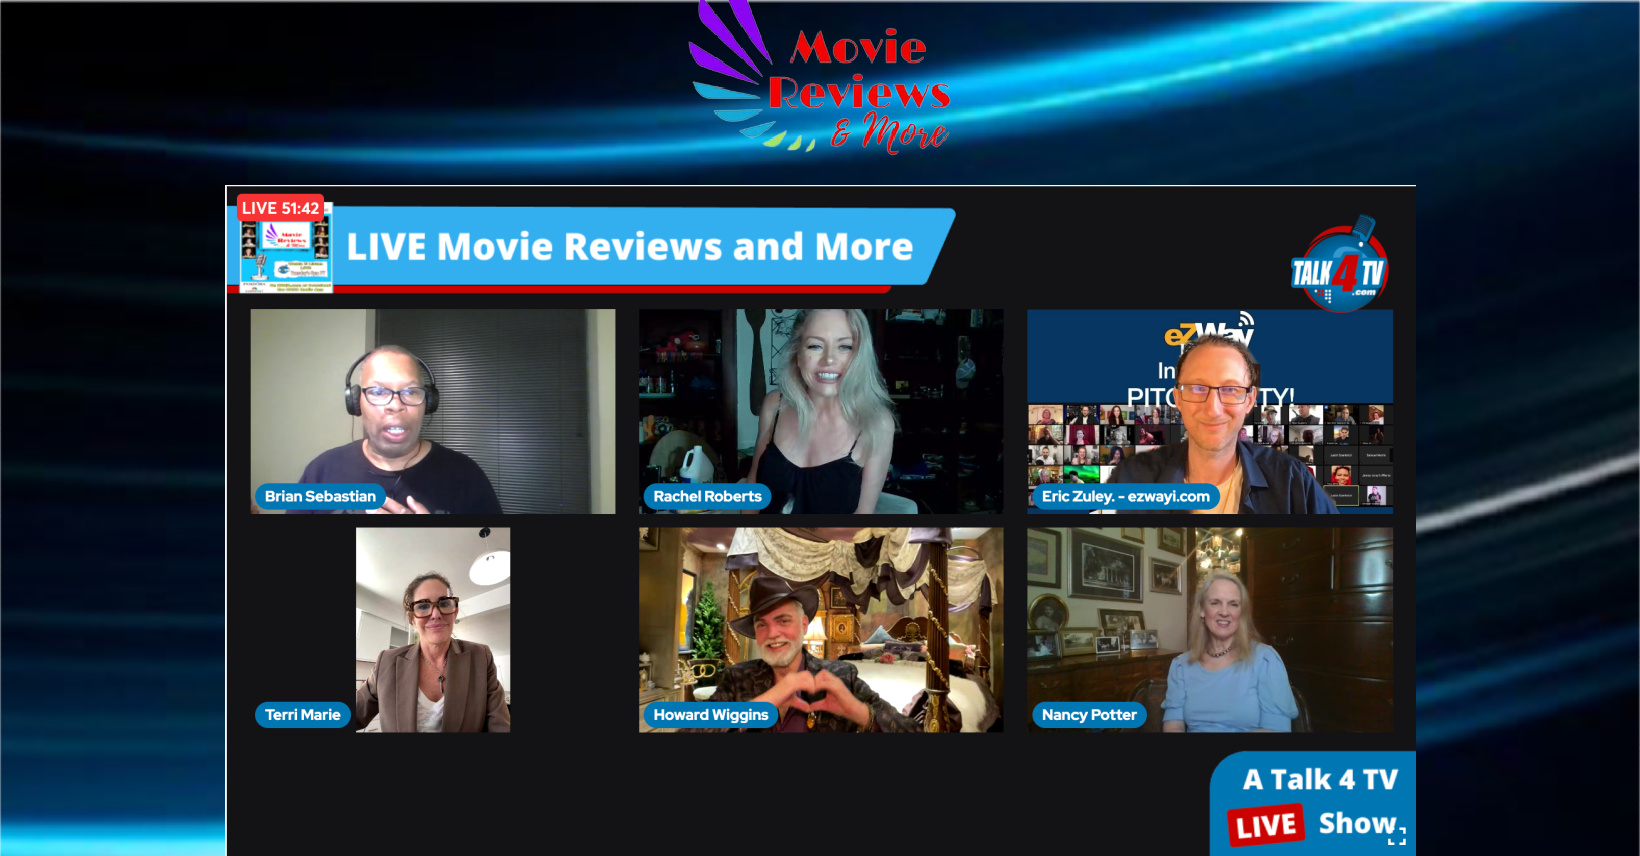 Movie Reviews and More Starring Eric Zuley and Nancy Potter